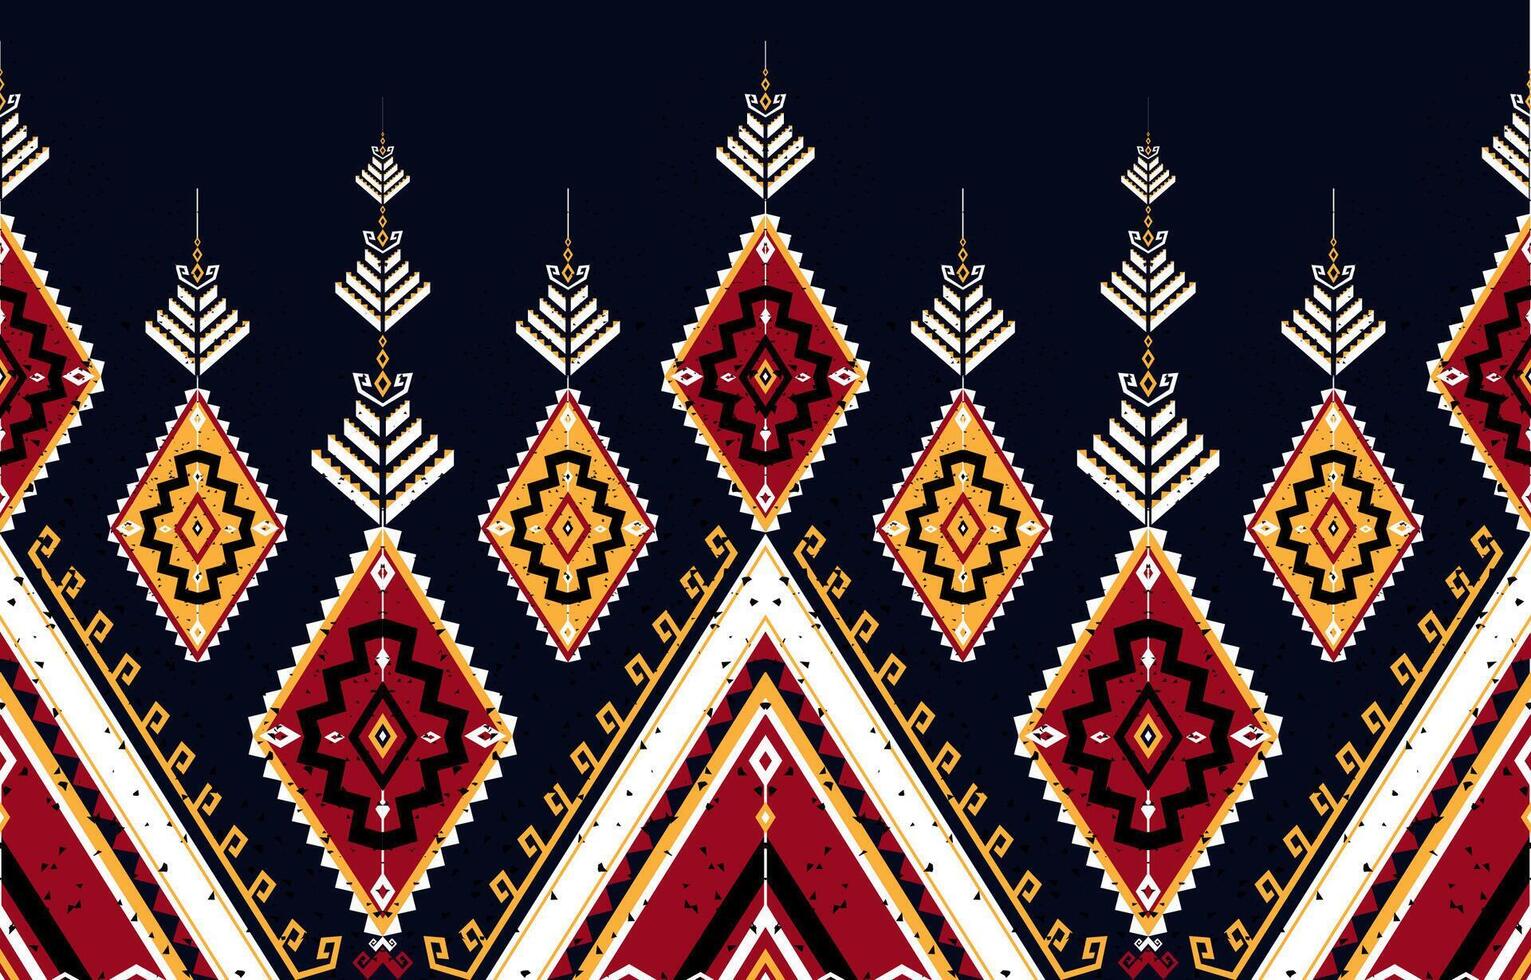 Geometric ethnic oriental pattern traditional Design for background, carpet,wallpaper,clothing,wrapping,Batik,fabric,Vector illustration embroidery style. vector